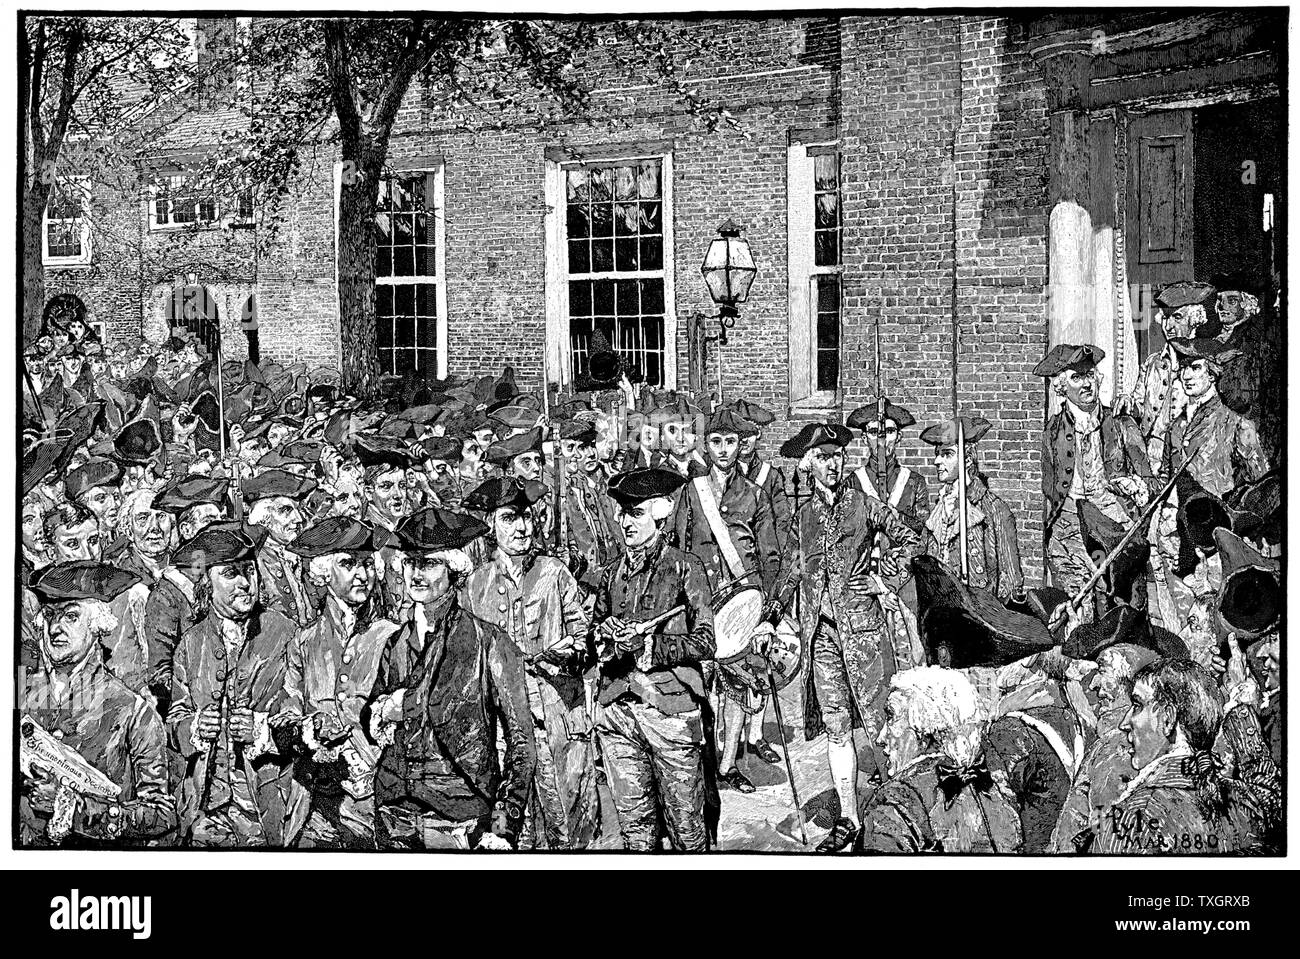 First Public Reading of the Declaration of Independence.  Passed by Congress in Philadelphia, 2 July, 1776, adopted on 4 July.  Engraving from 'Harper's Weekly', 1880. Engraving Stock Photo